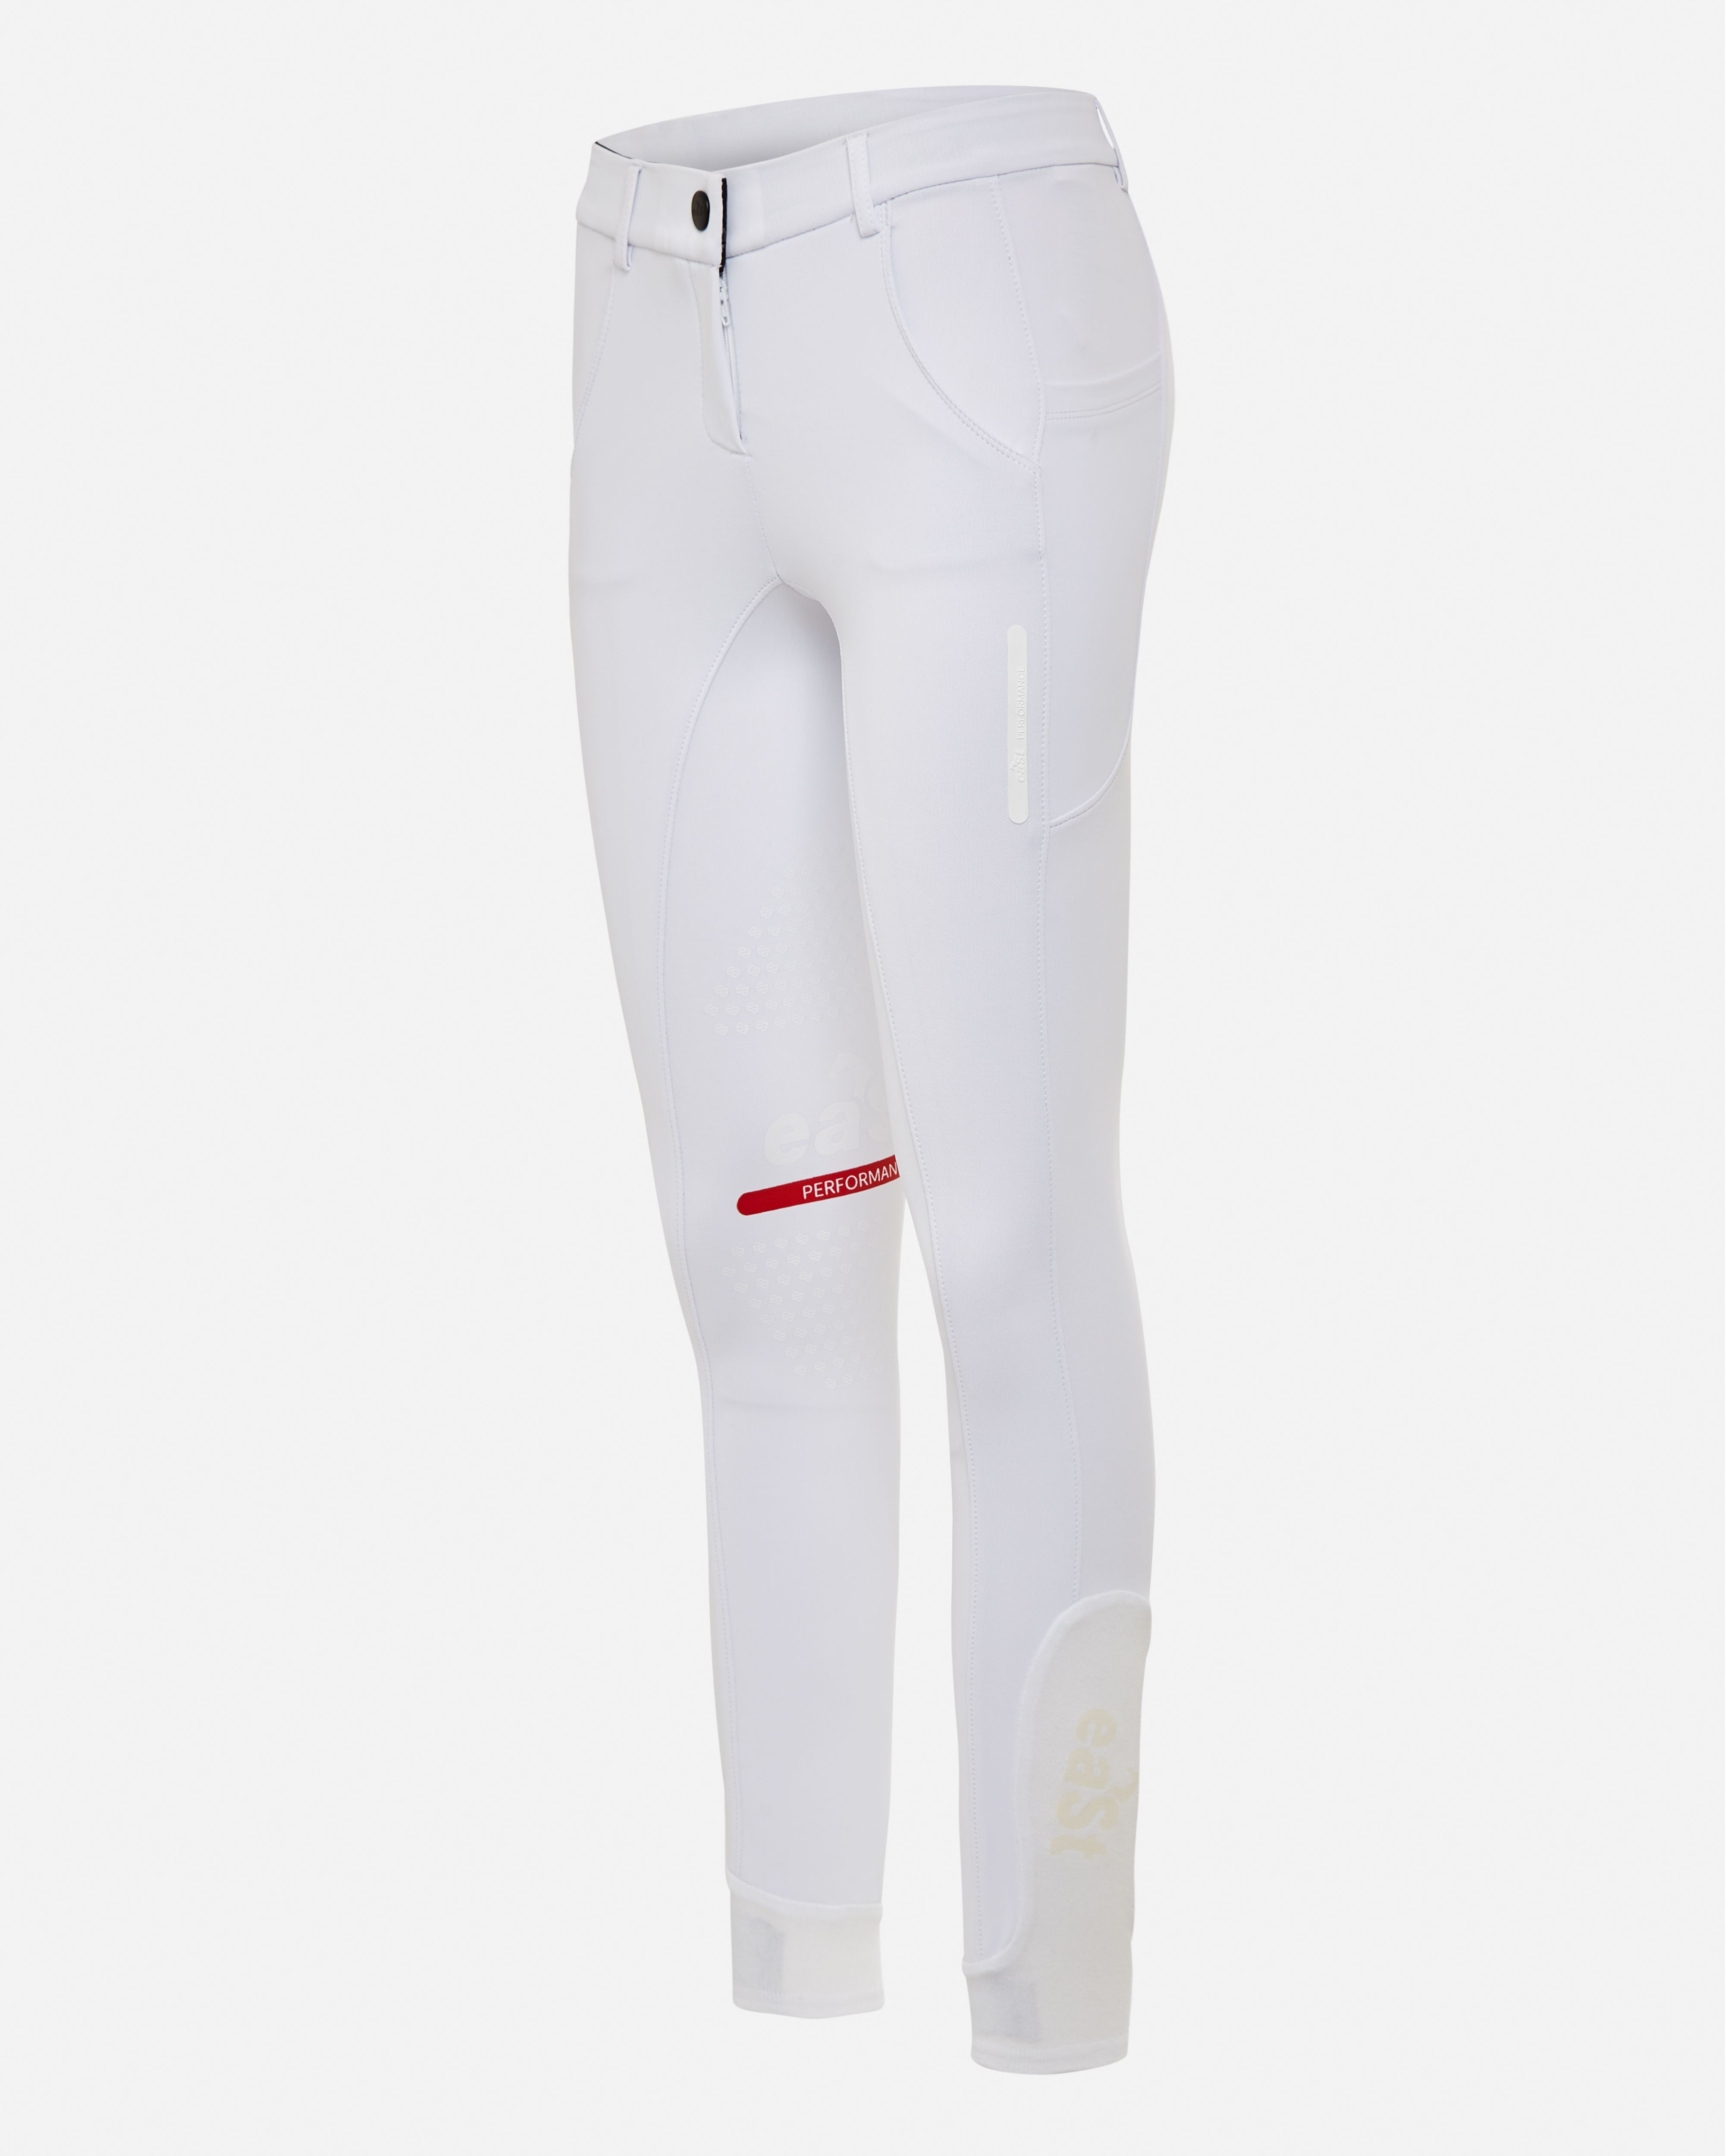 eaSt R2 Performance Jumping | White | L